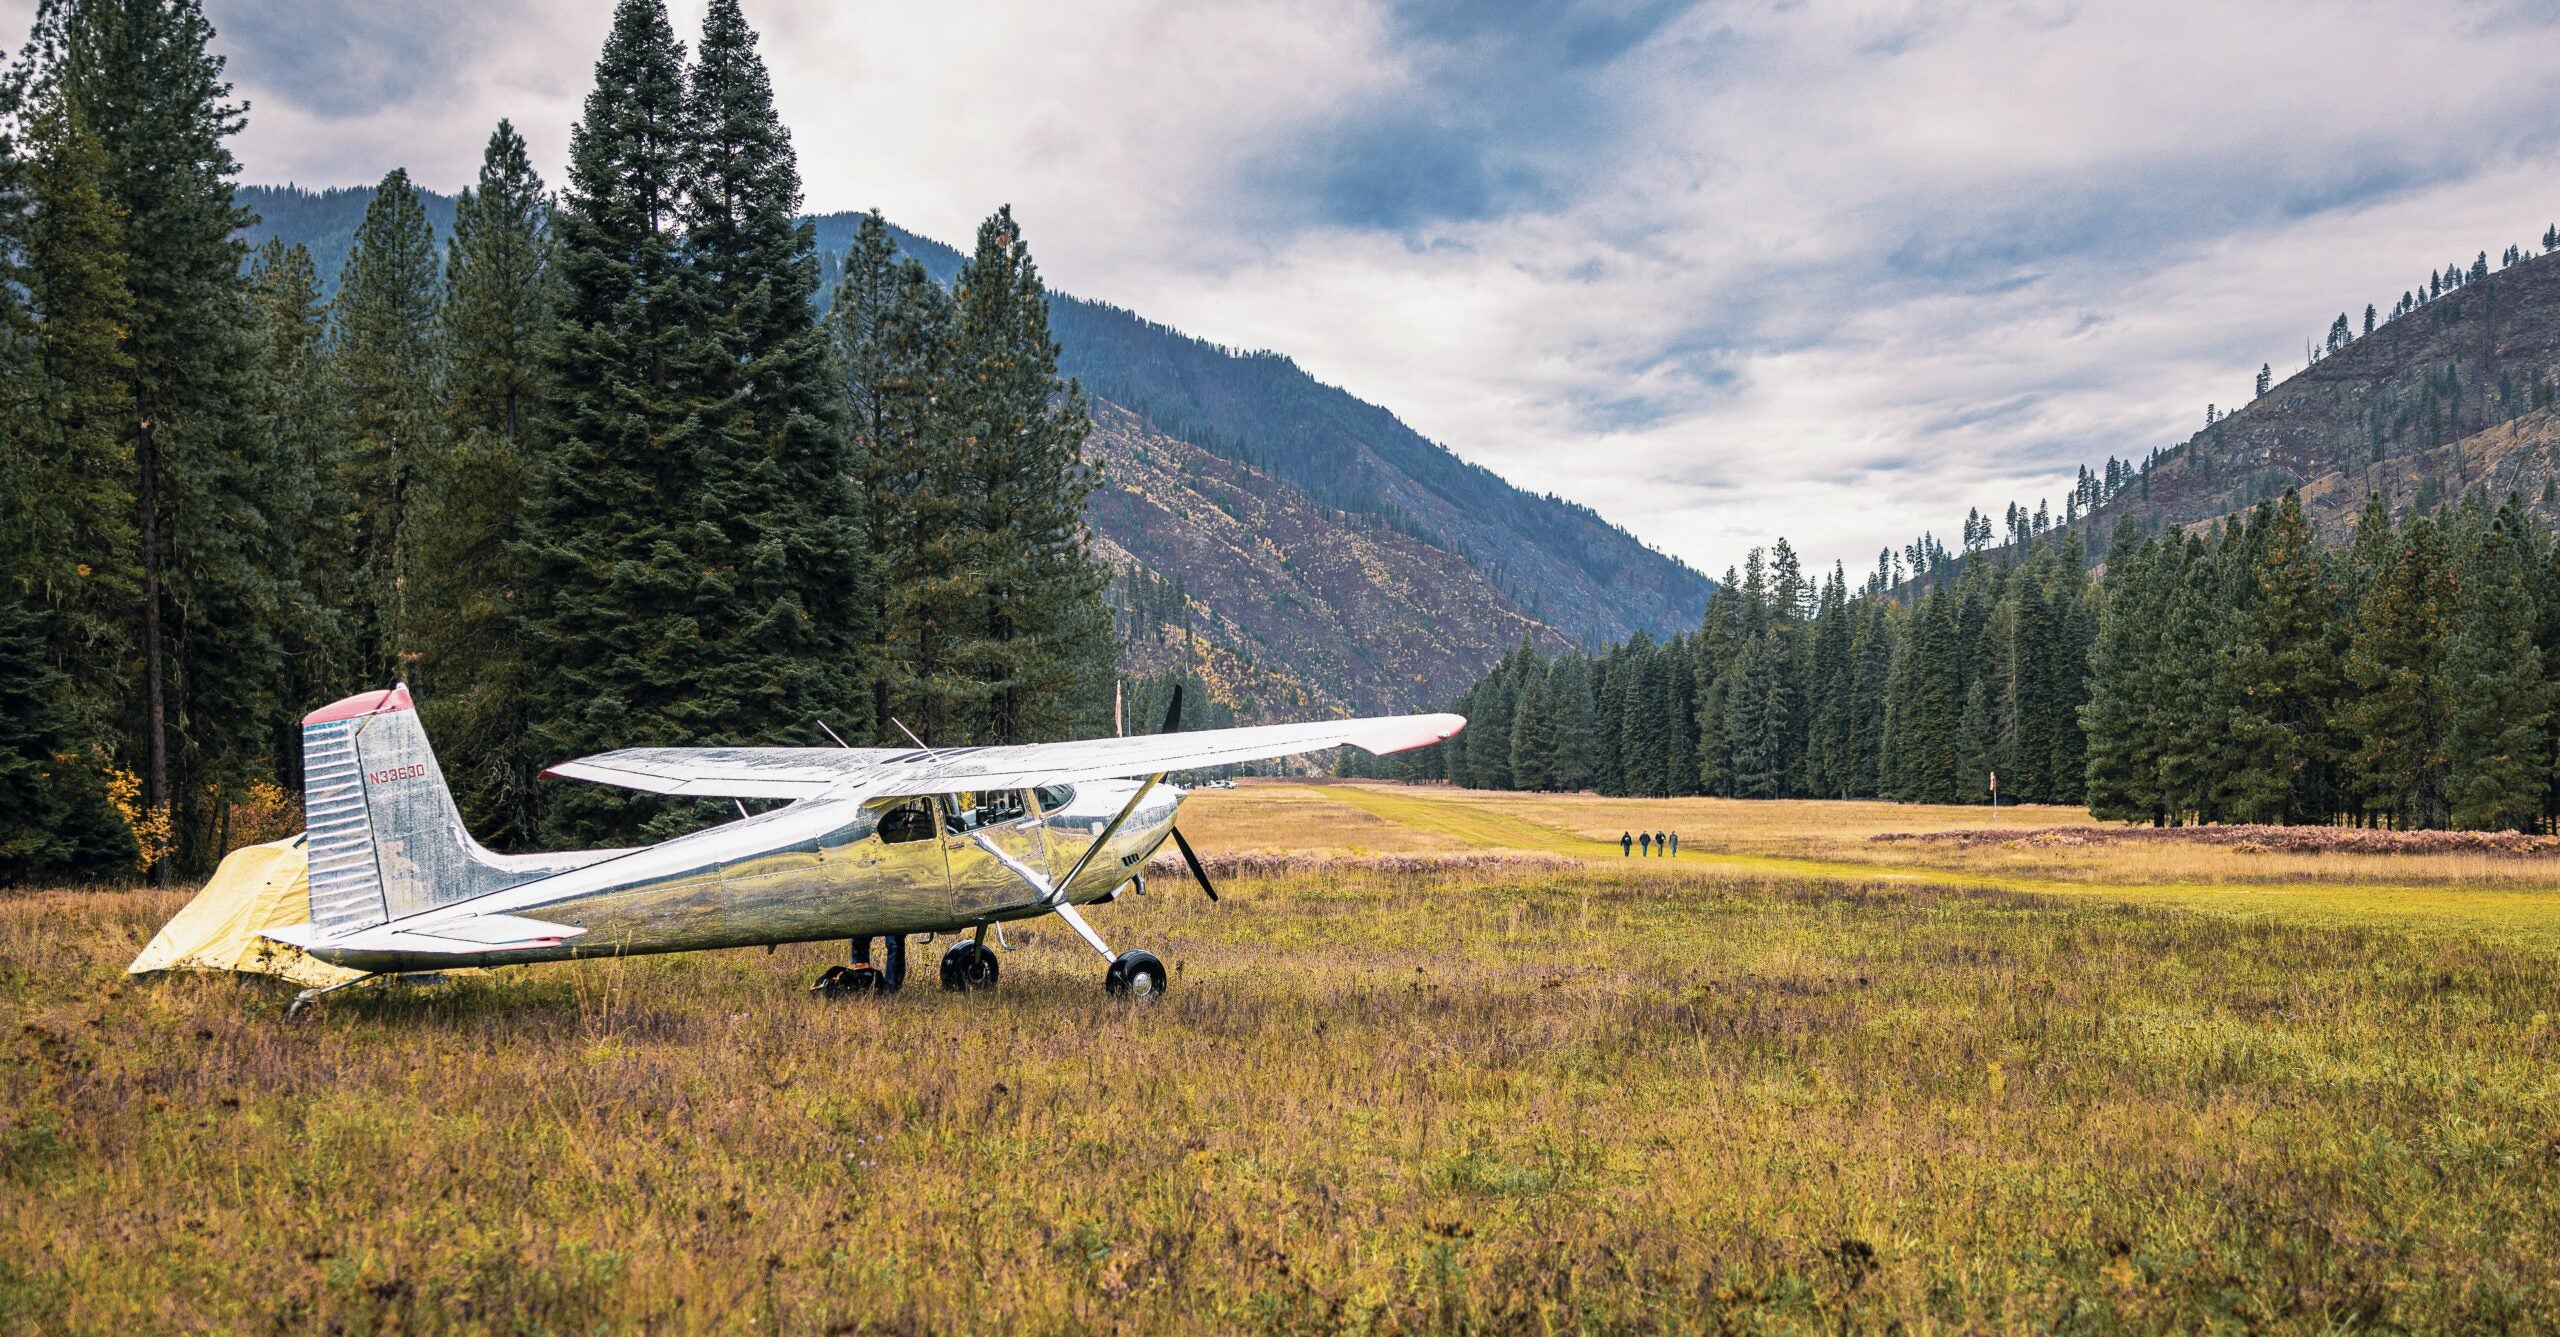 Recreational Aviation Foundation Remains the Sum of Its Hearts